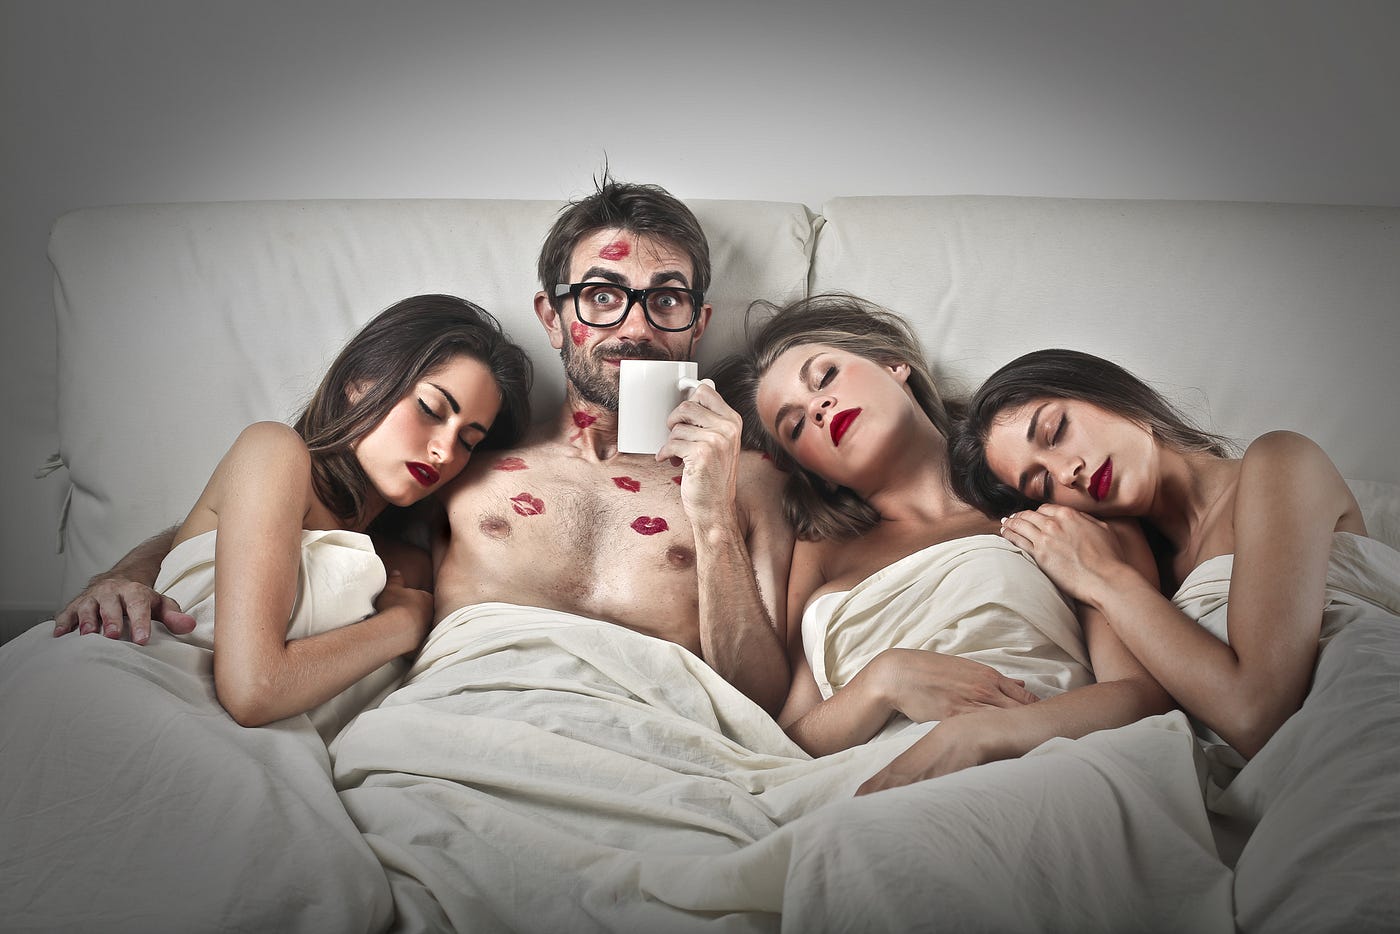 Group sex is a logistical nightmare photo